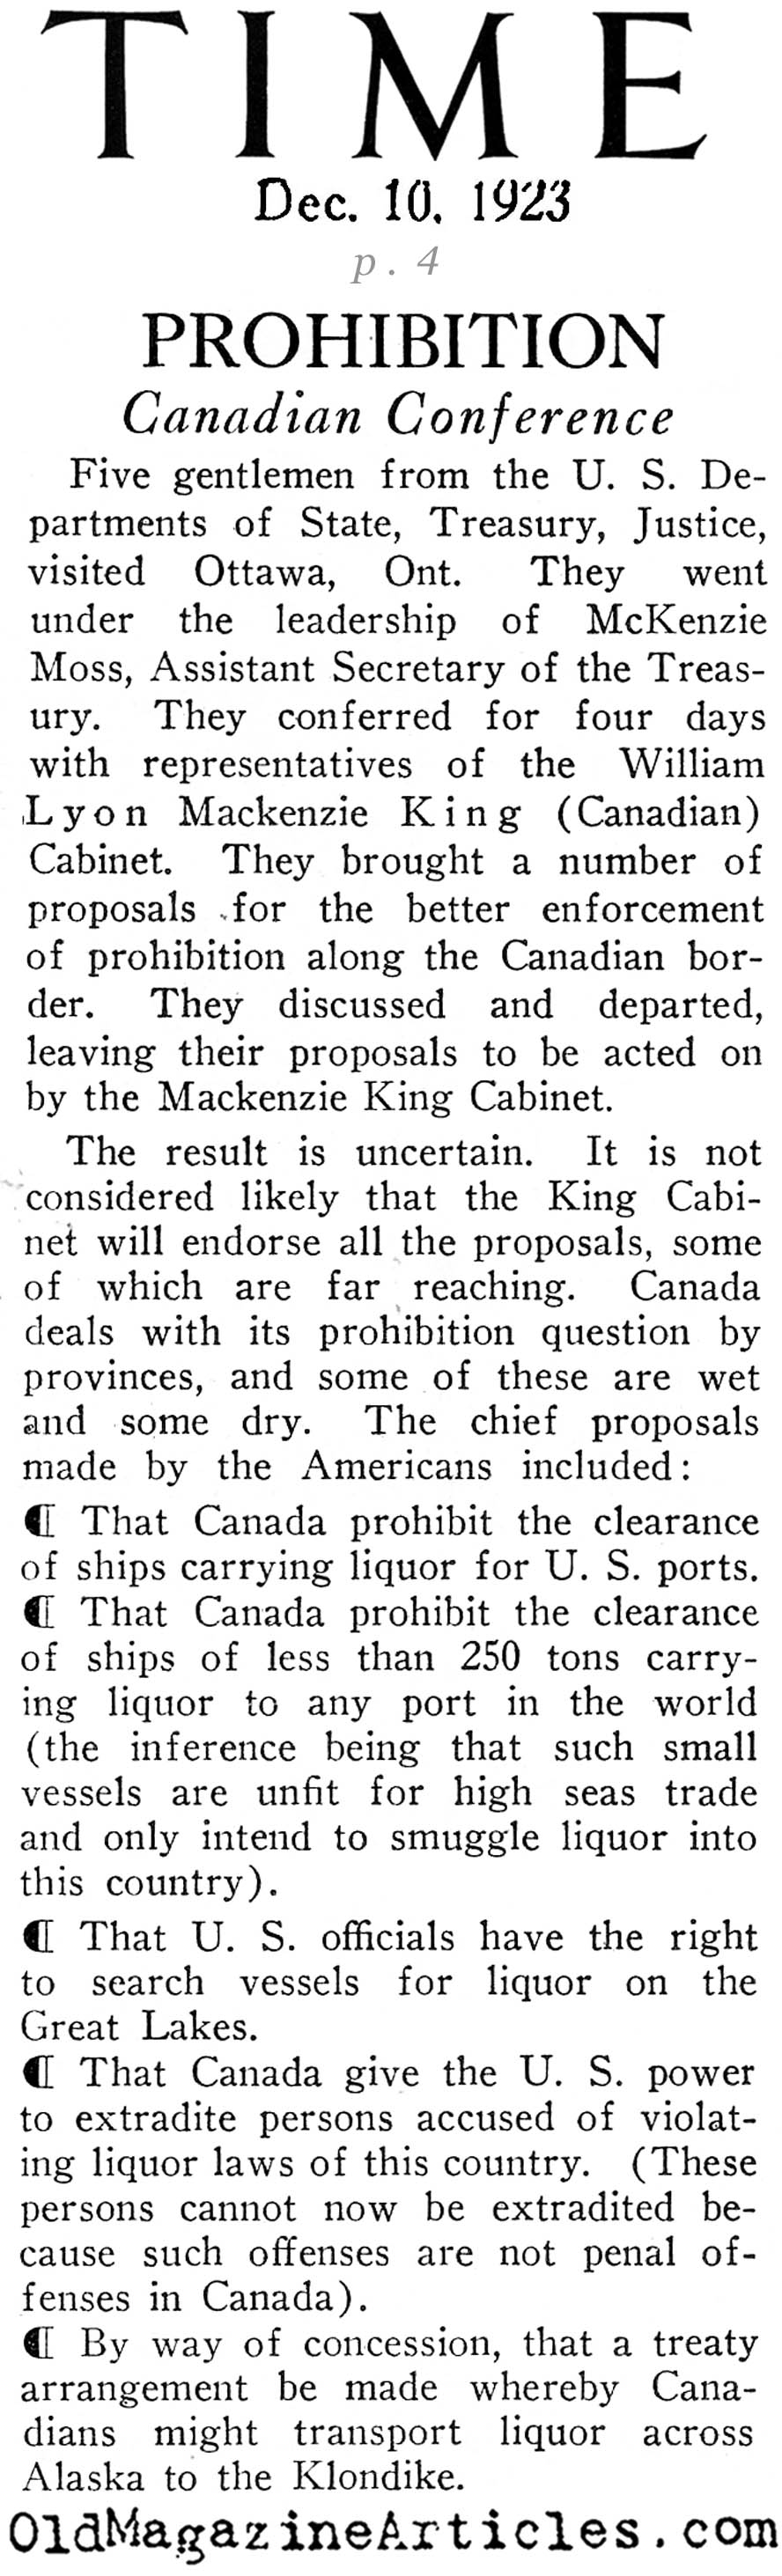 Prohibition And Our Northern Neighbor (Time Magazine, 1923)